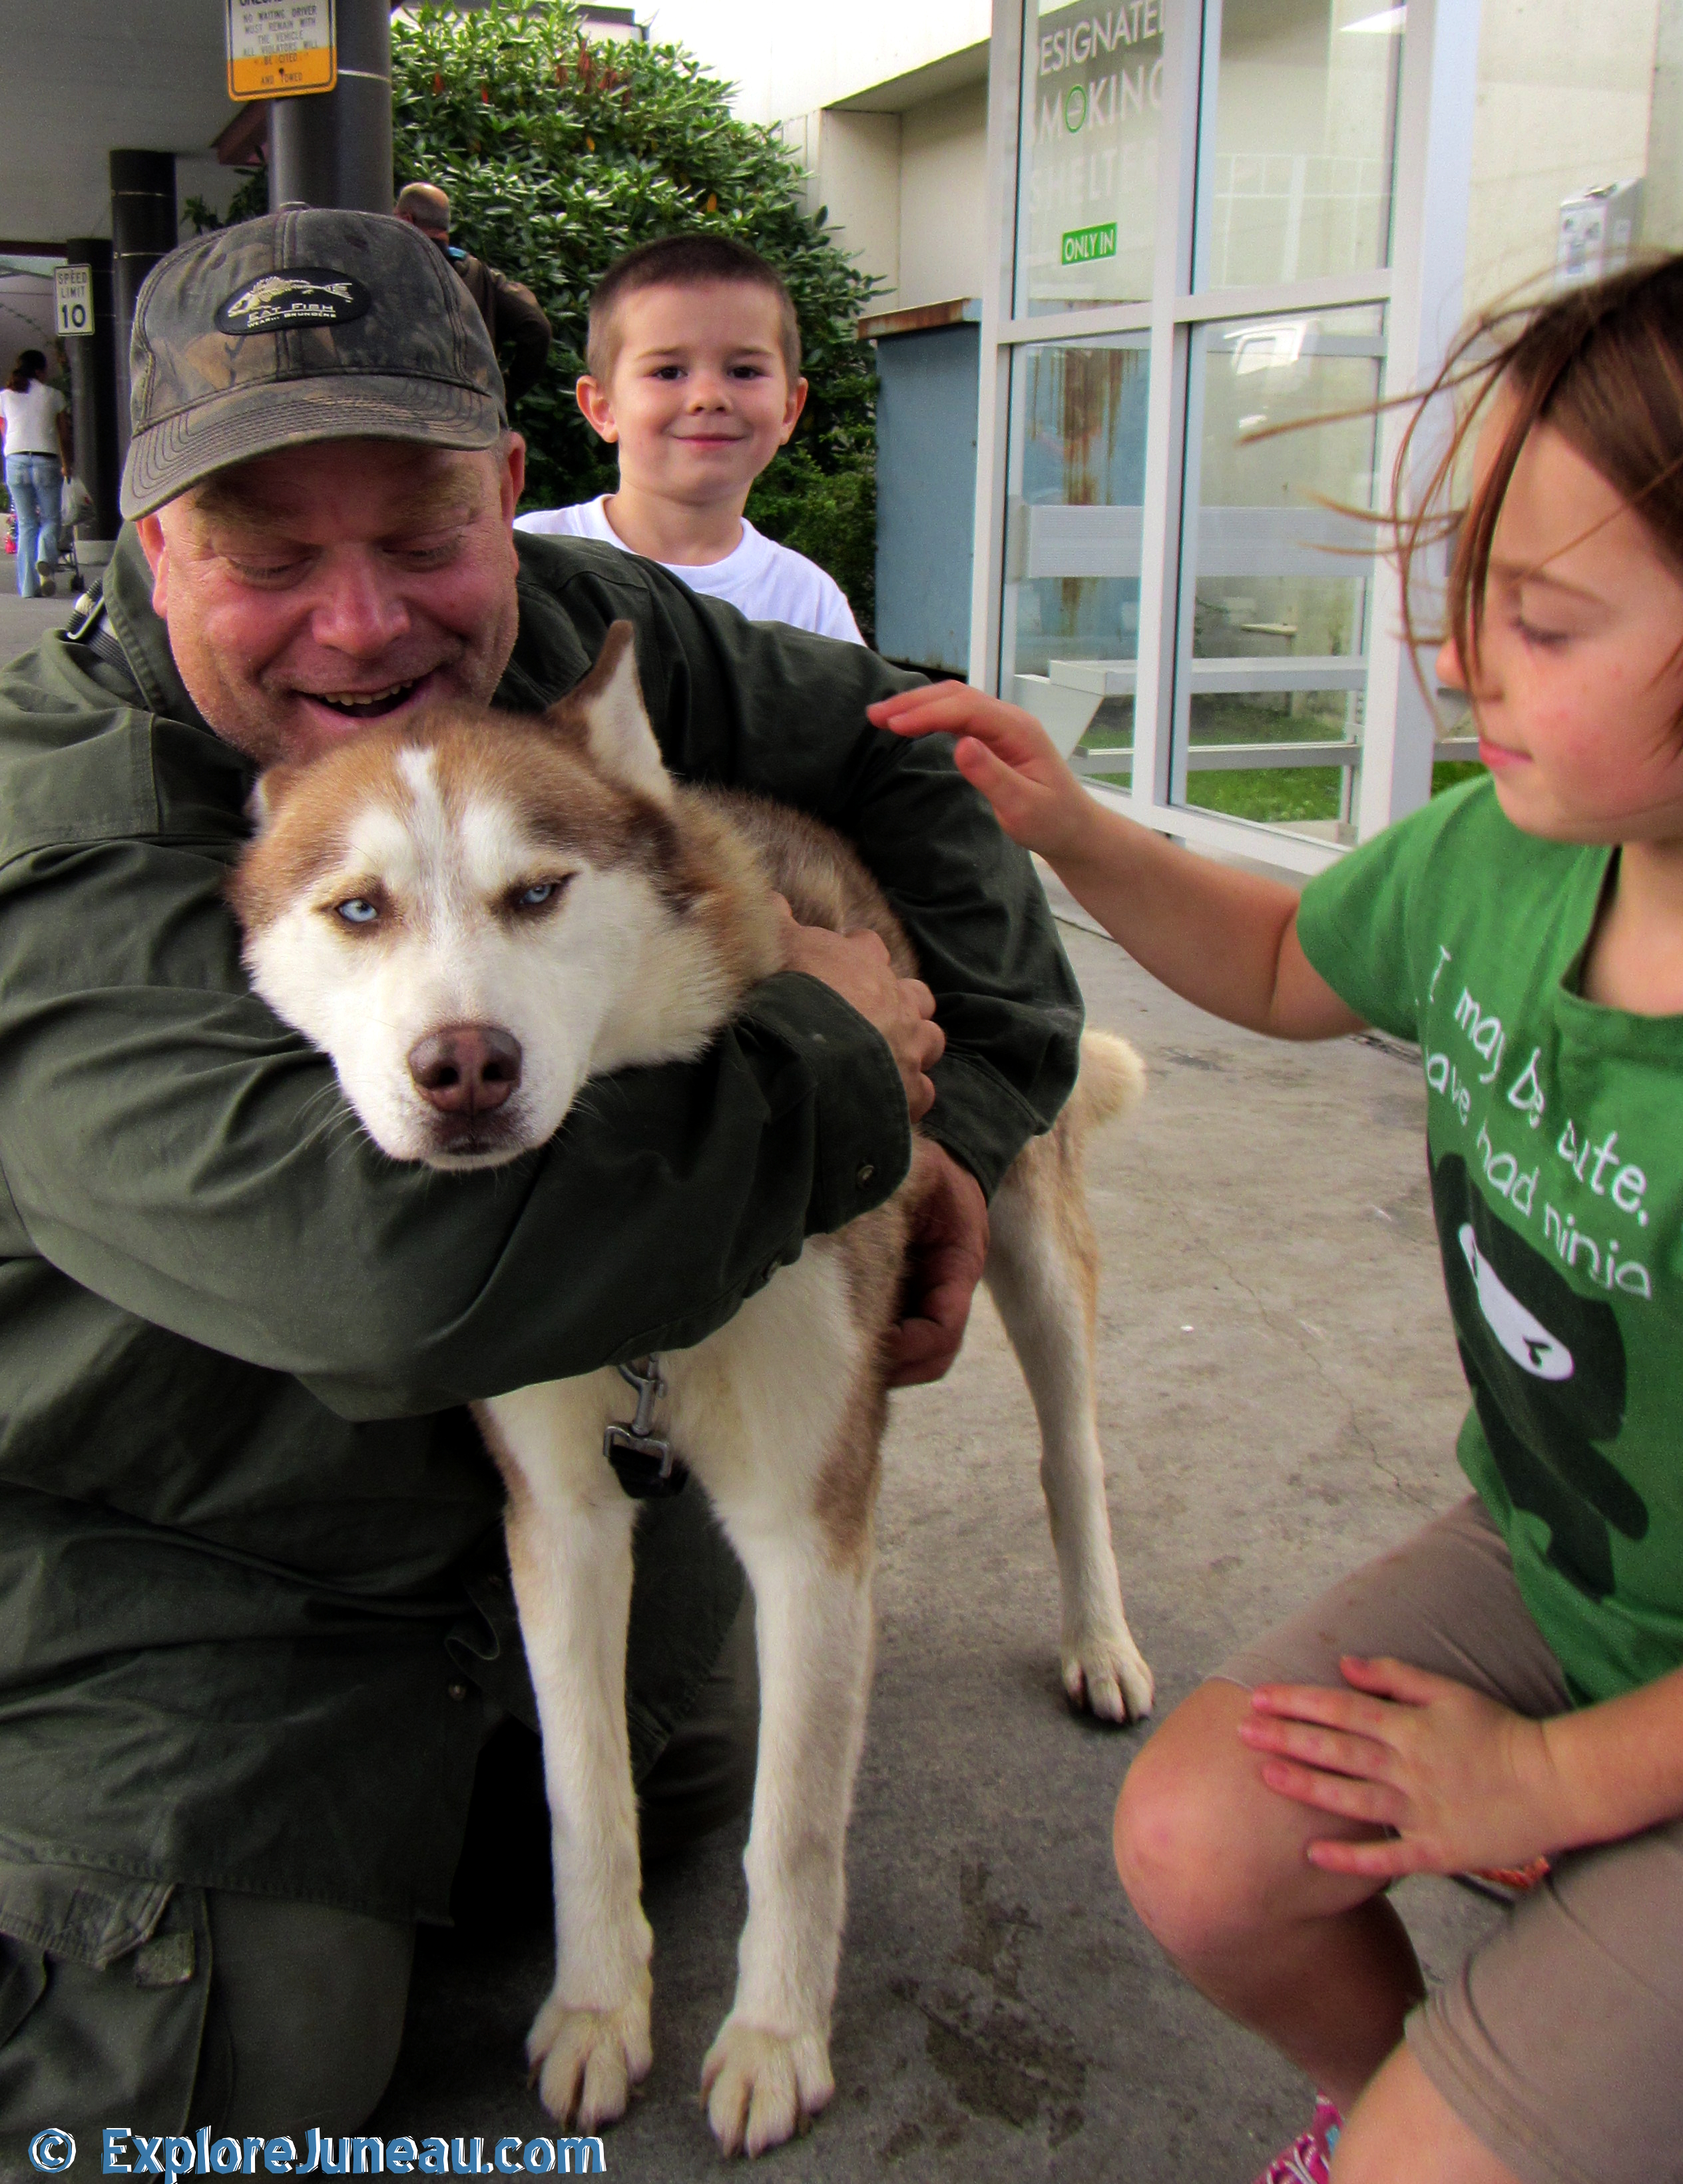 Charlie Brown - Owner Release Husky from Hoonah, Alaska I am so proud to have helped Charlie meet his new FurEver Family of 4 they really Love Charlie and he is a really lucky boy. Charlie now will have 2 awesome kids to play with a fenced backyard~!